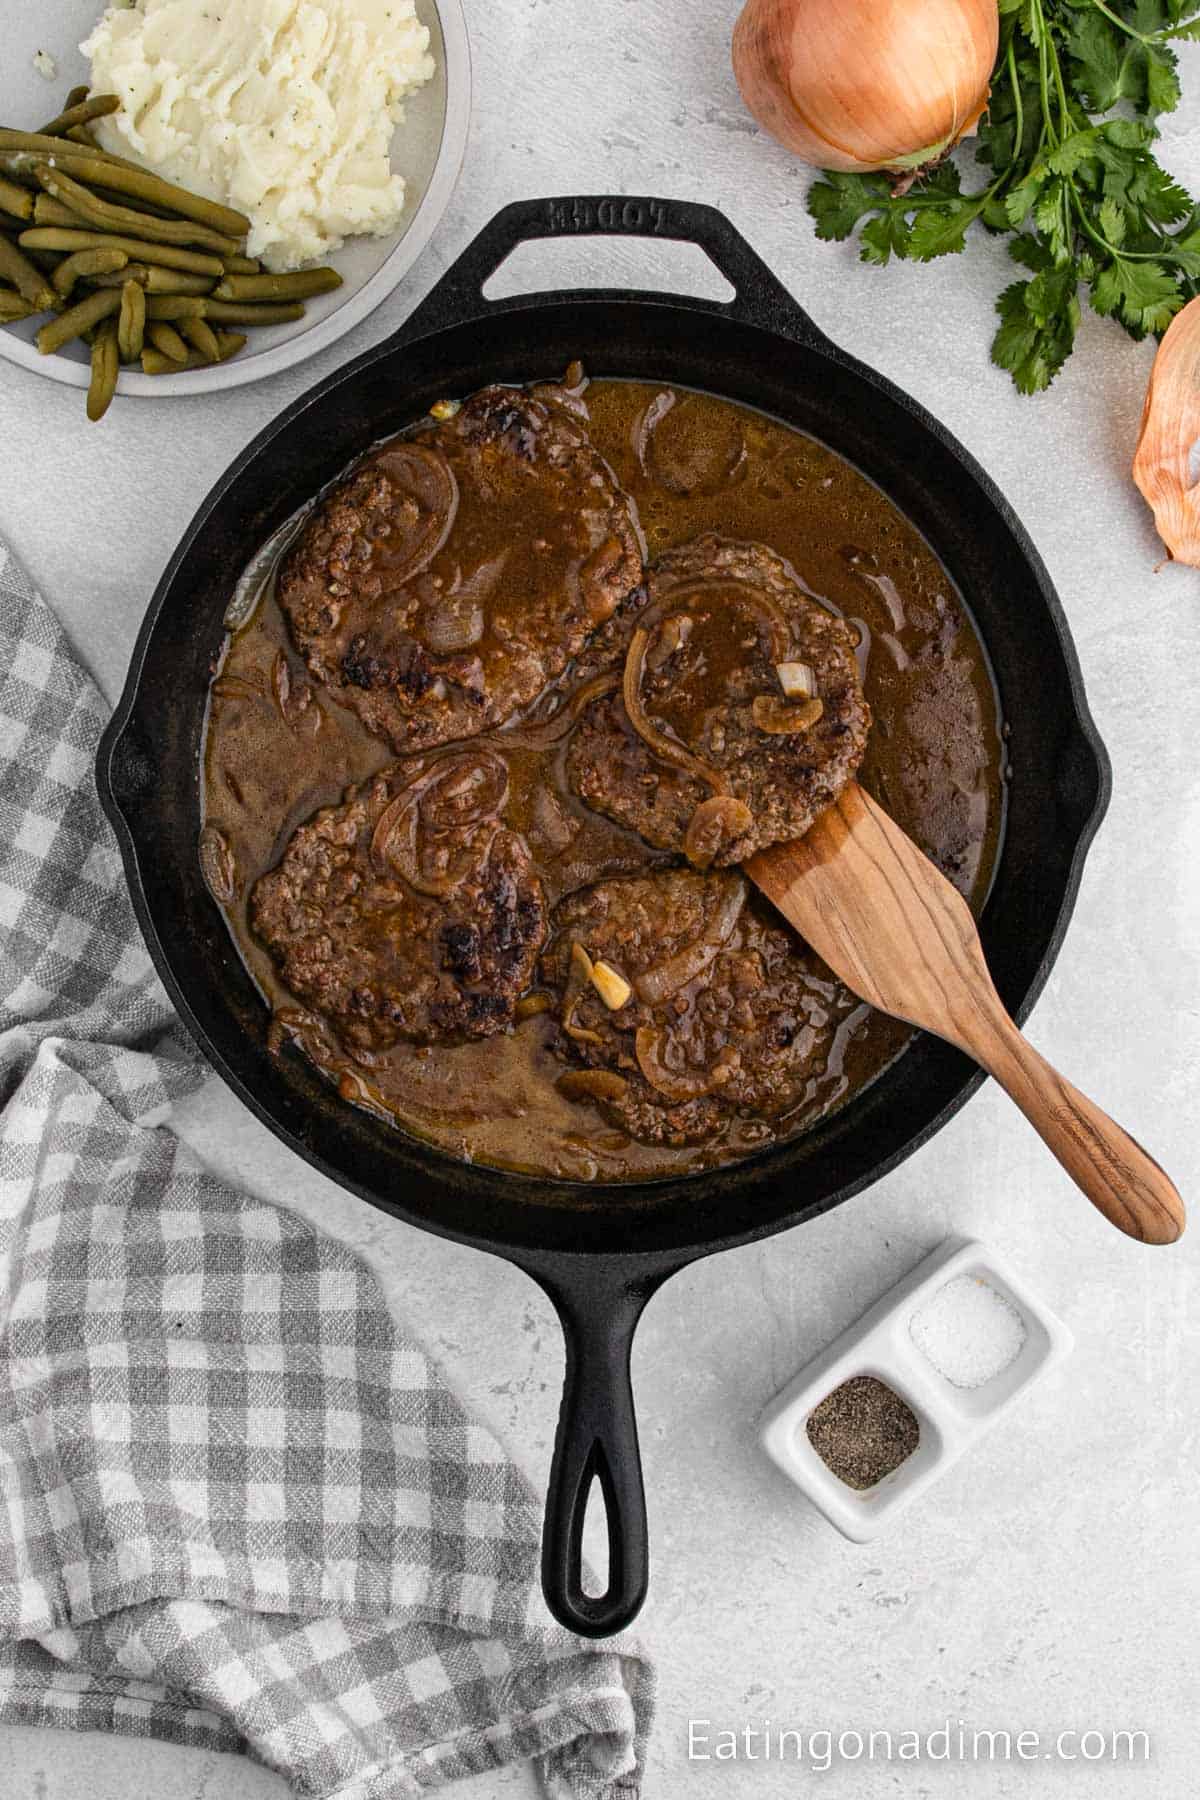 Cooked cube steak and gravy in cast iron skillet with a wooden spoon